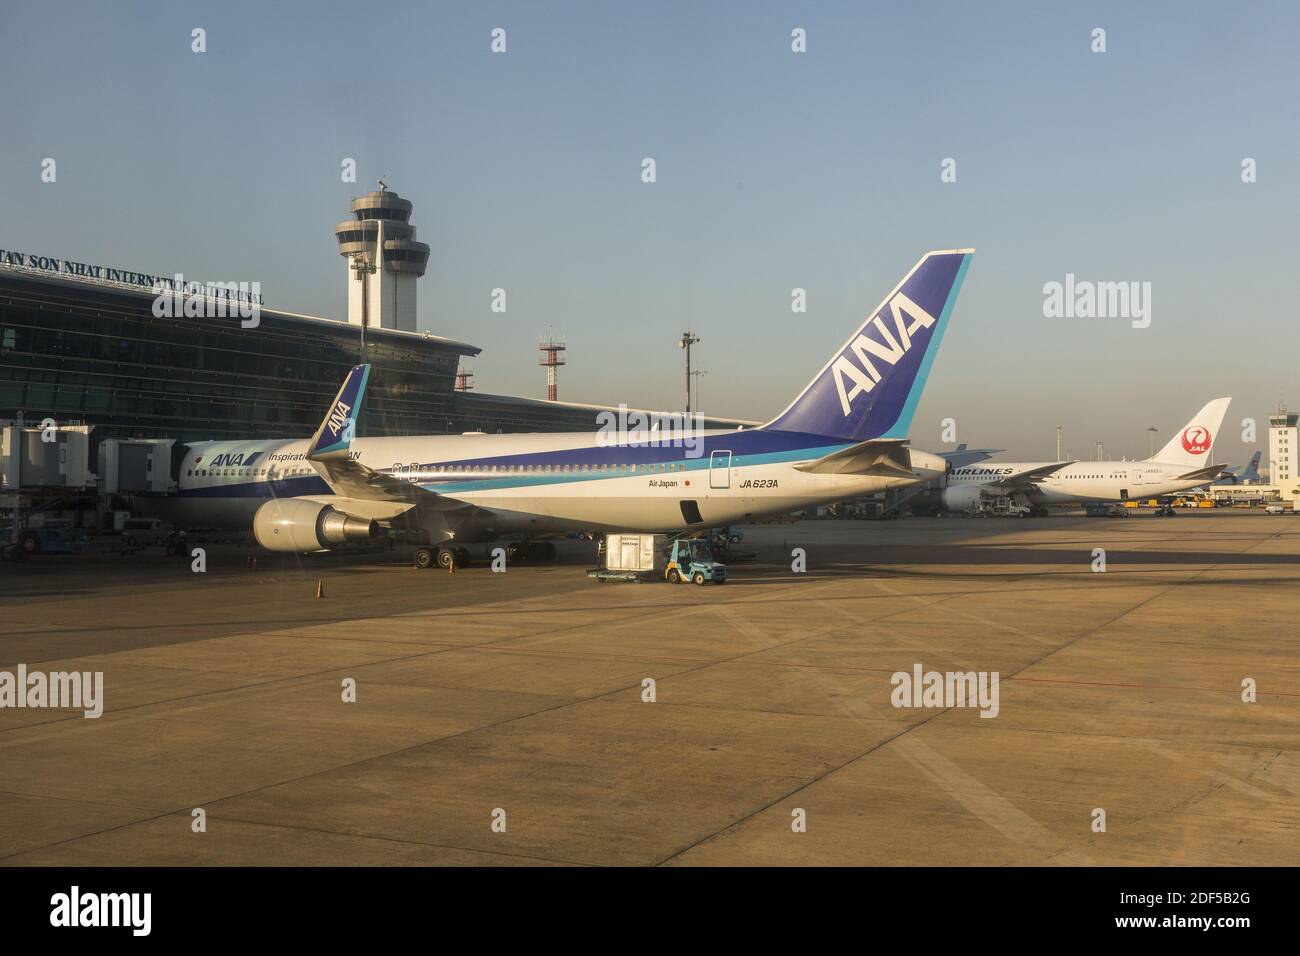 Japan Airline et ANA Airplanes Banque D'Images